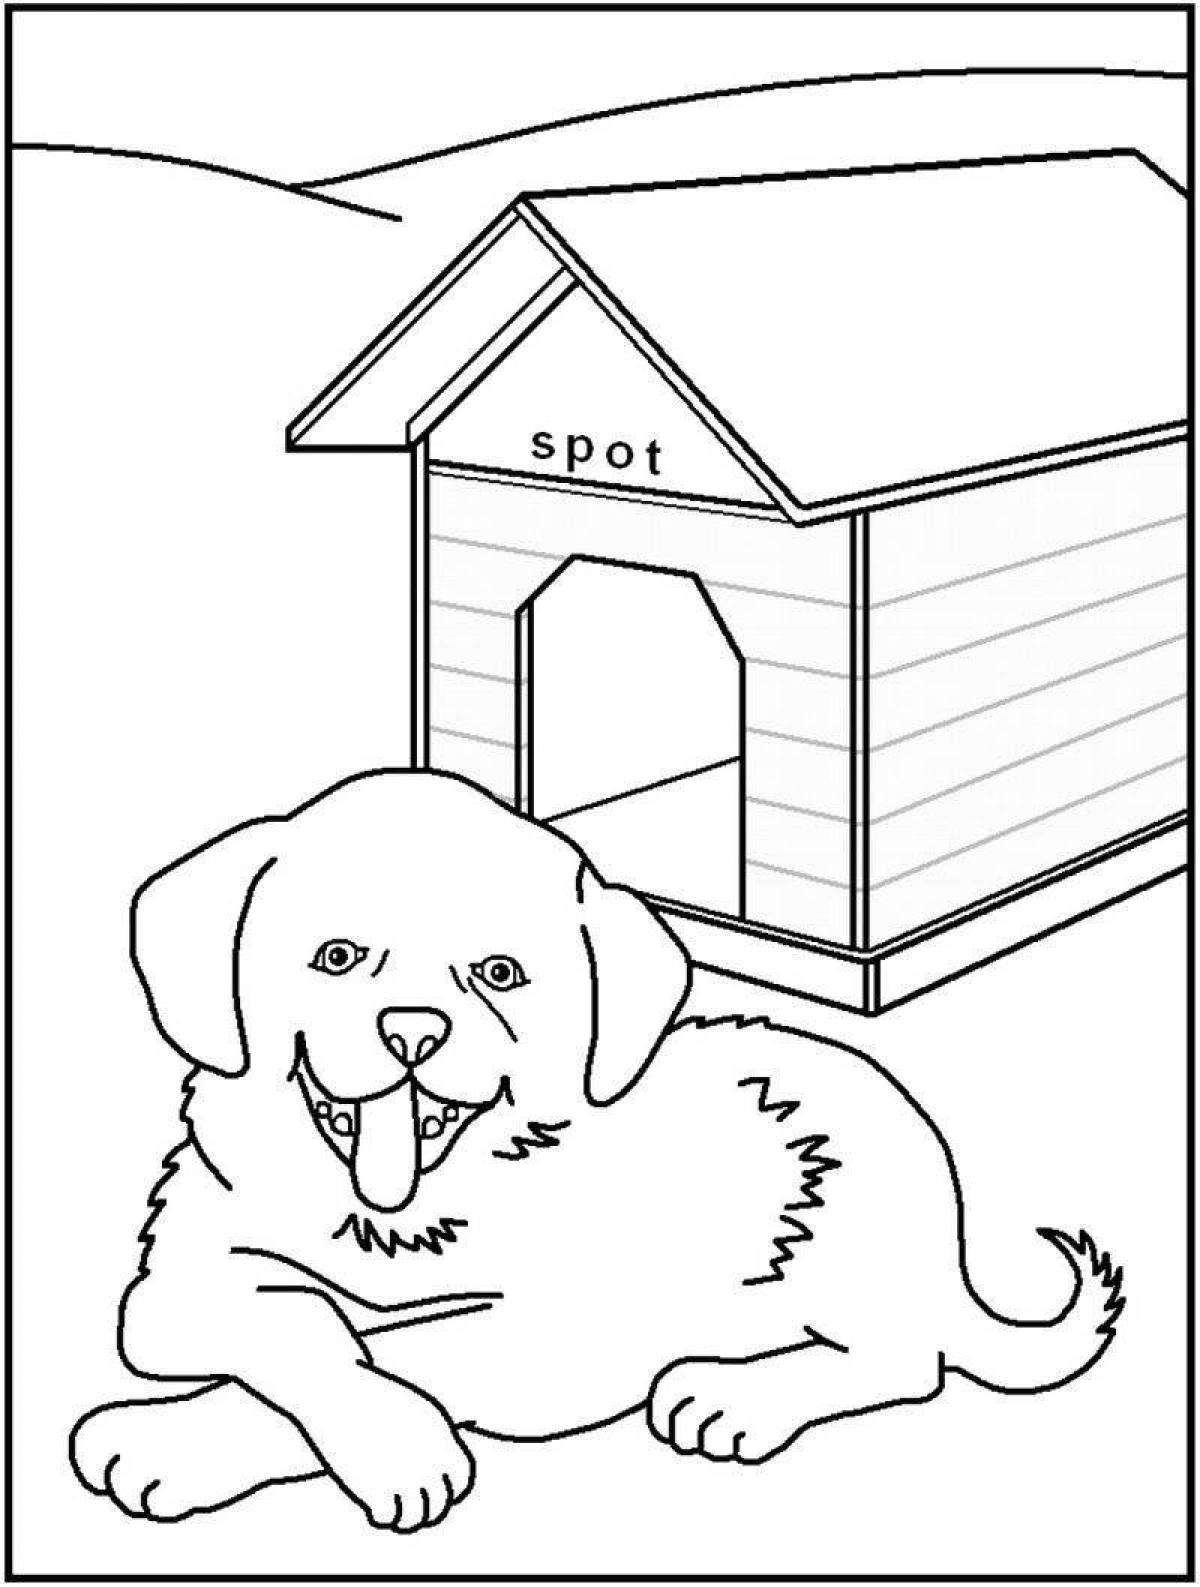 Coloring page gorgeous dog house